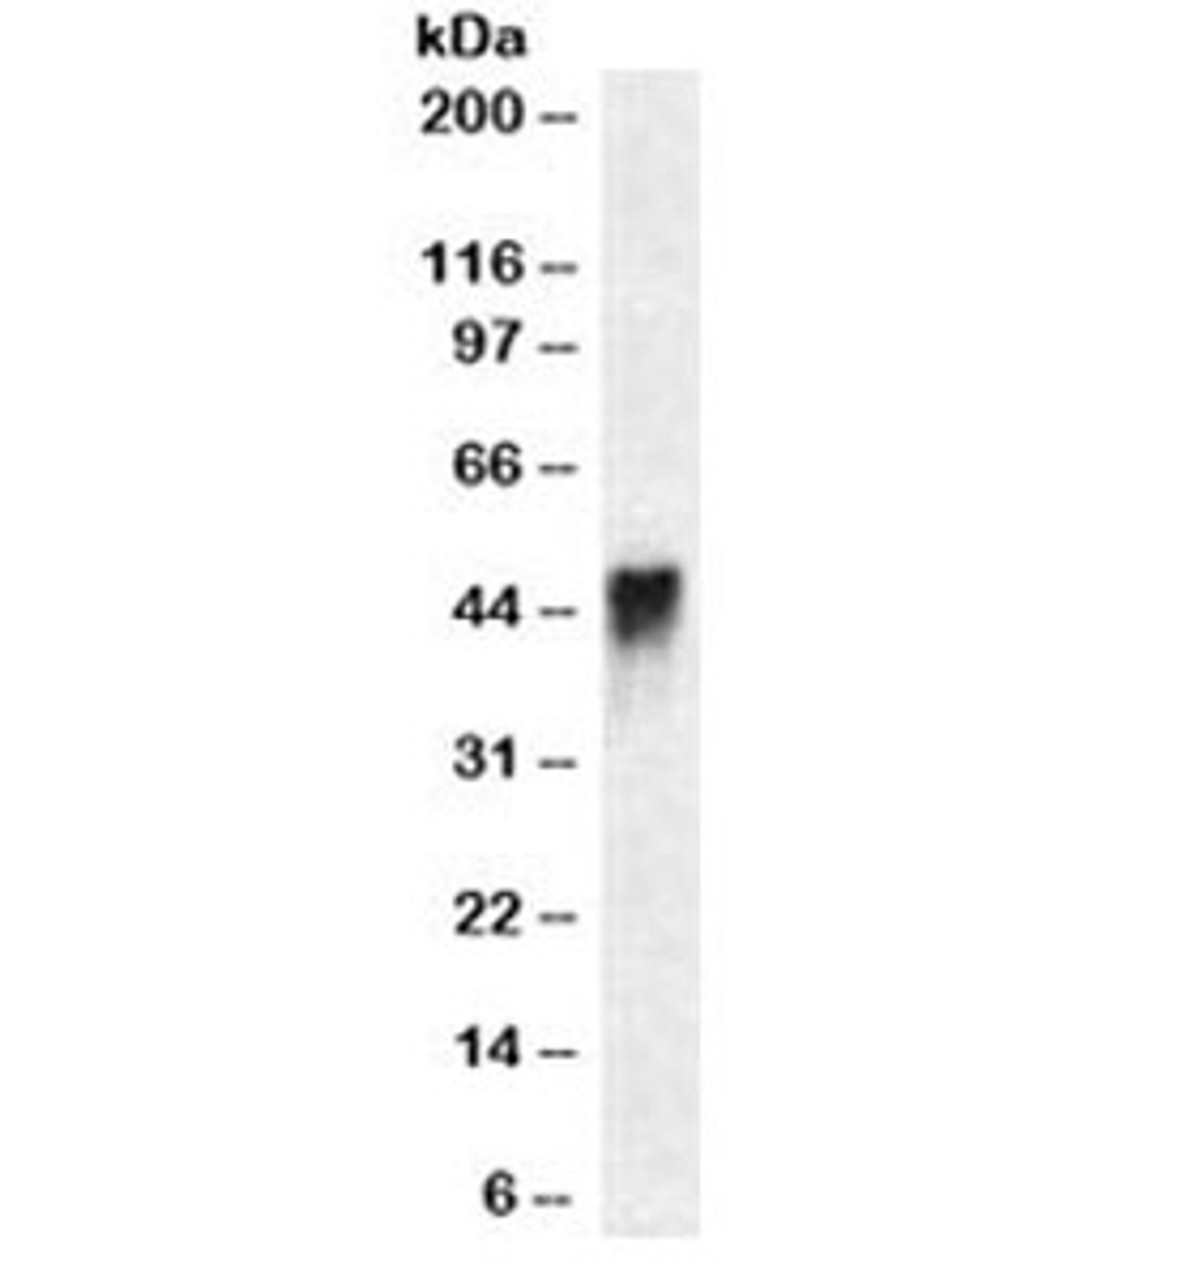 Western blot testing of Jurkat cell lysate with CD2 antibody (clone HuLy-m1) . Expected molecular weight ~47kDa.